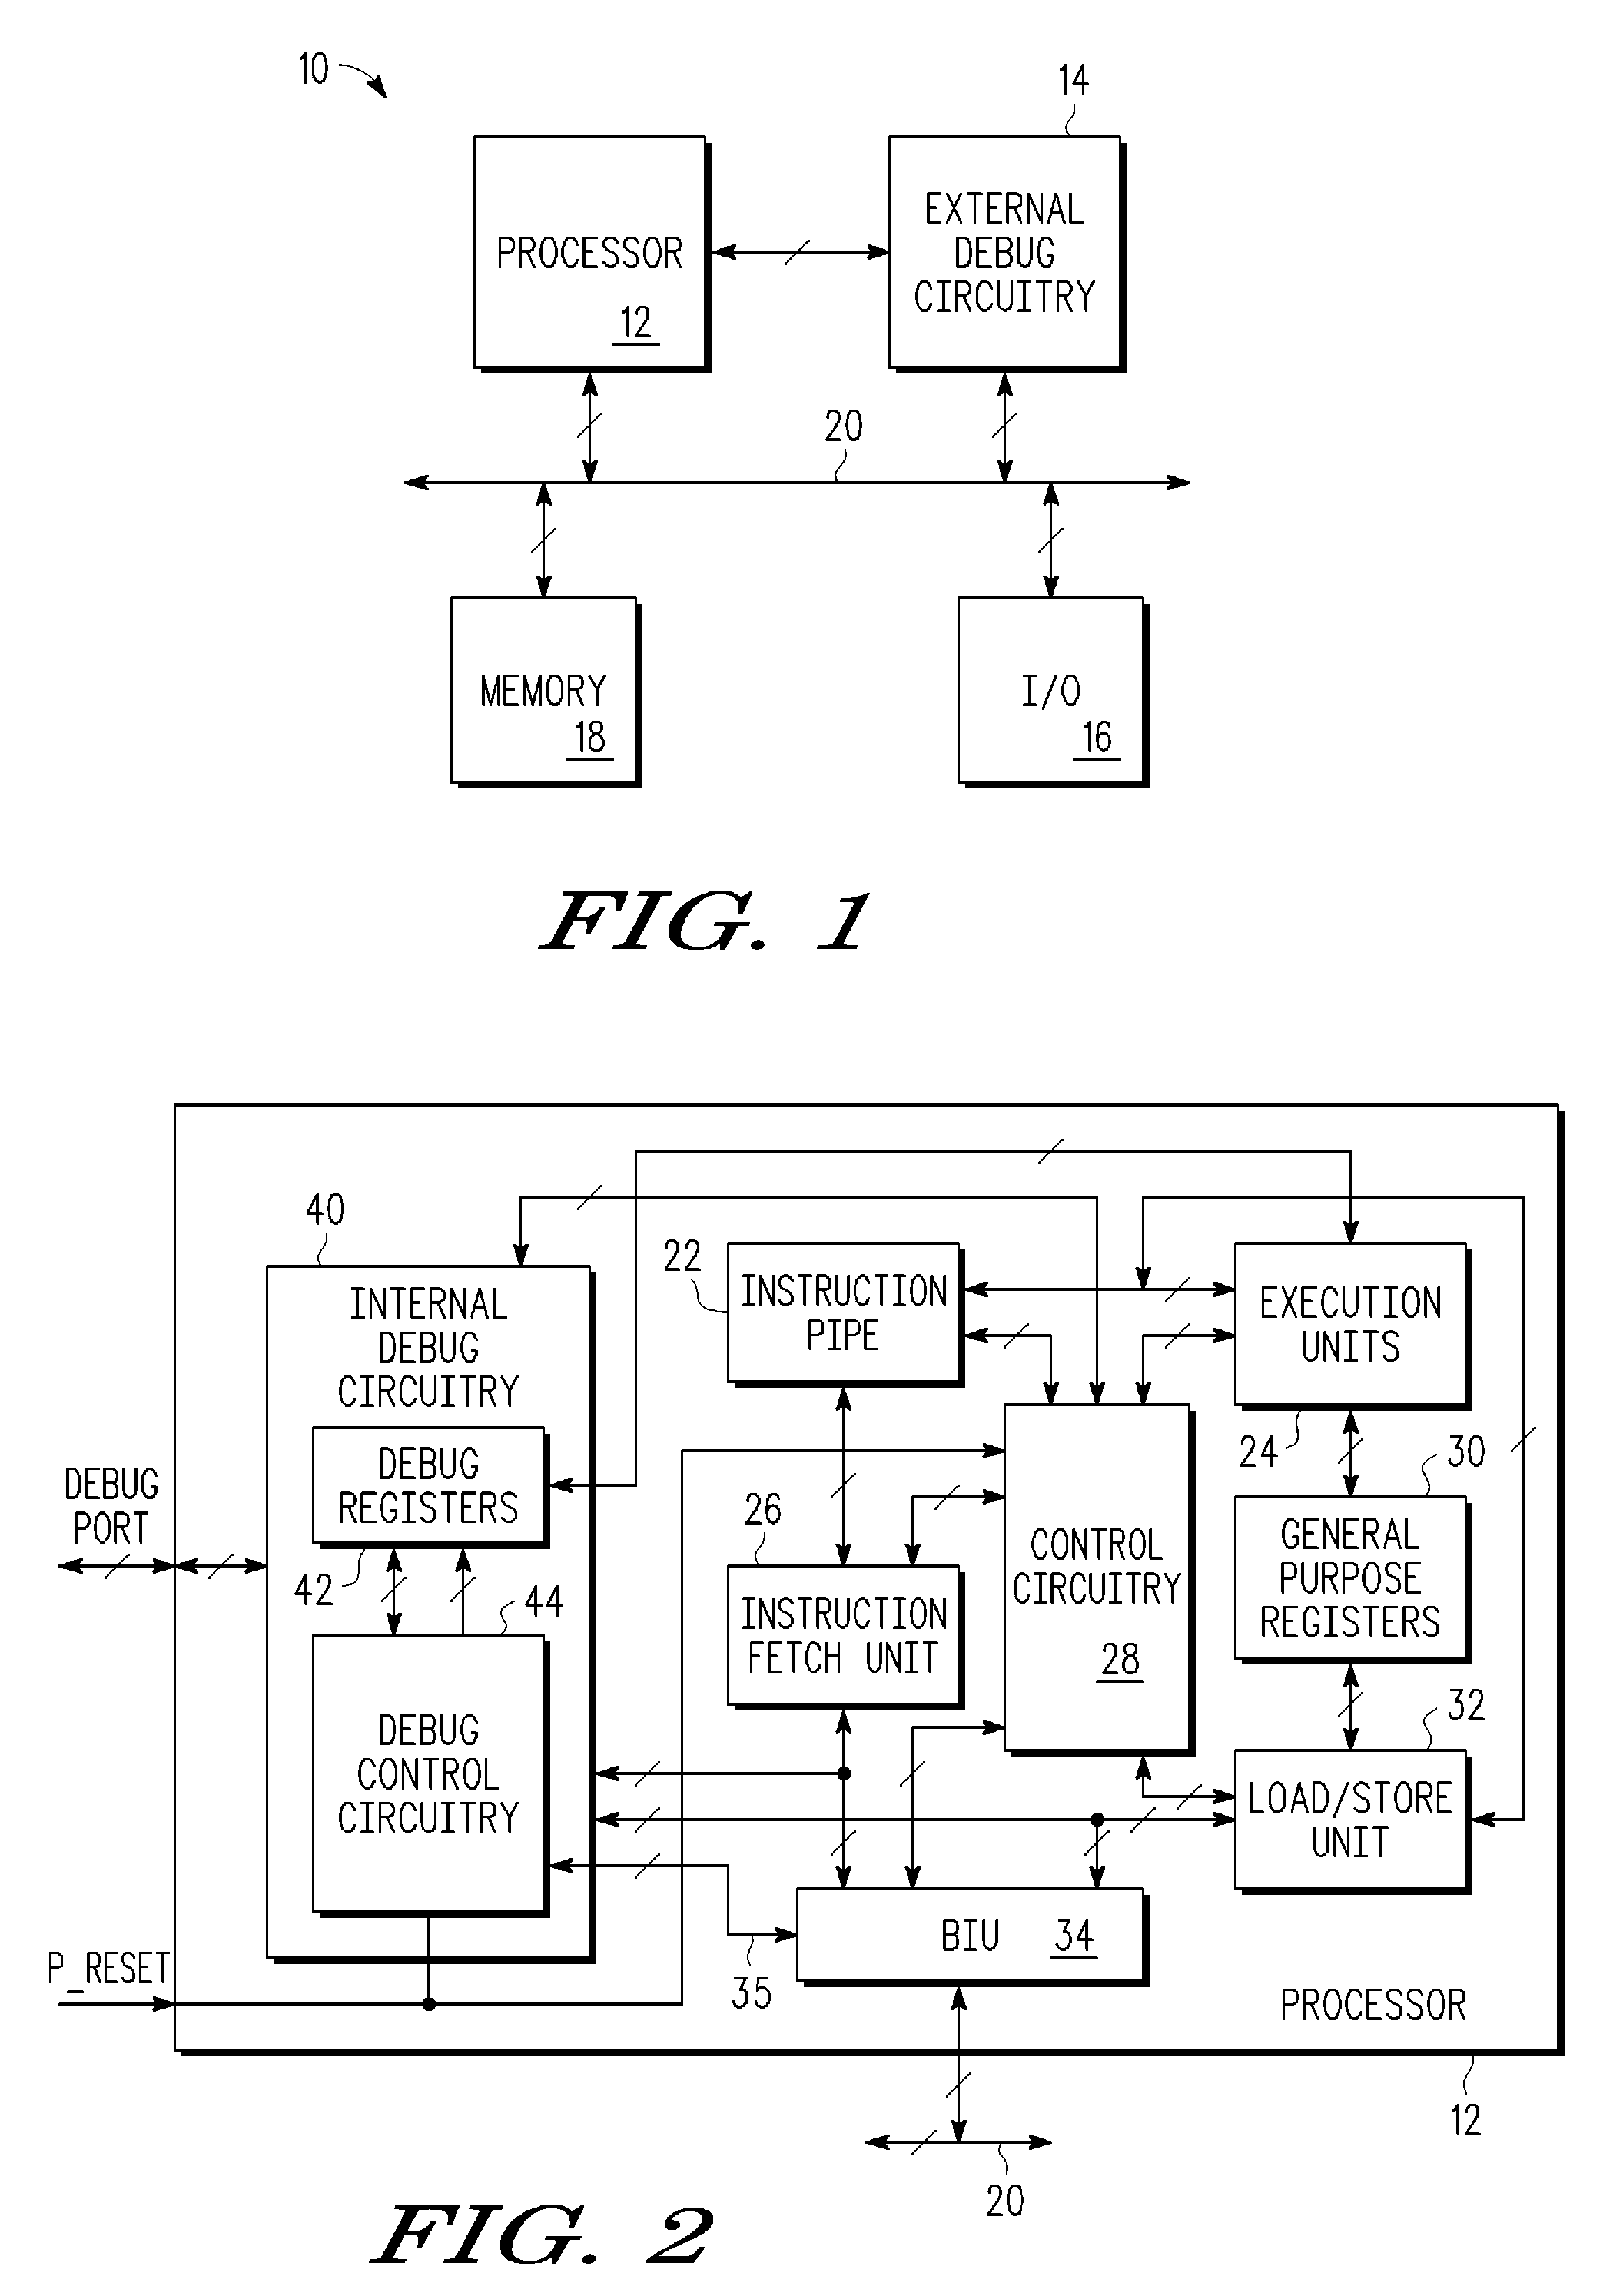 Debug instruction for use in a data processing system